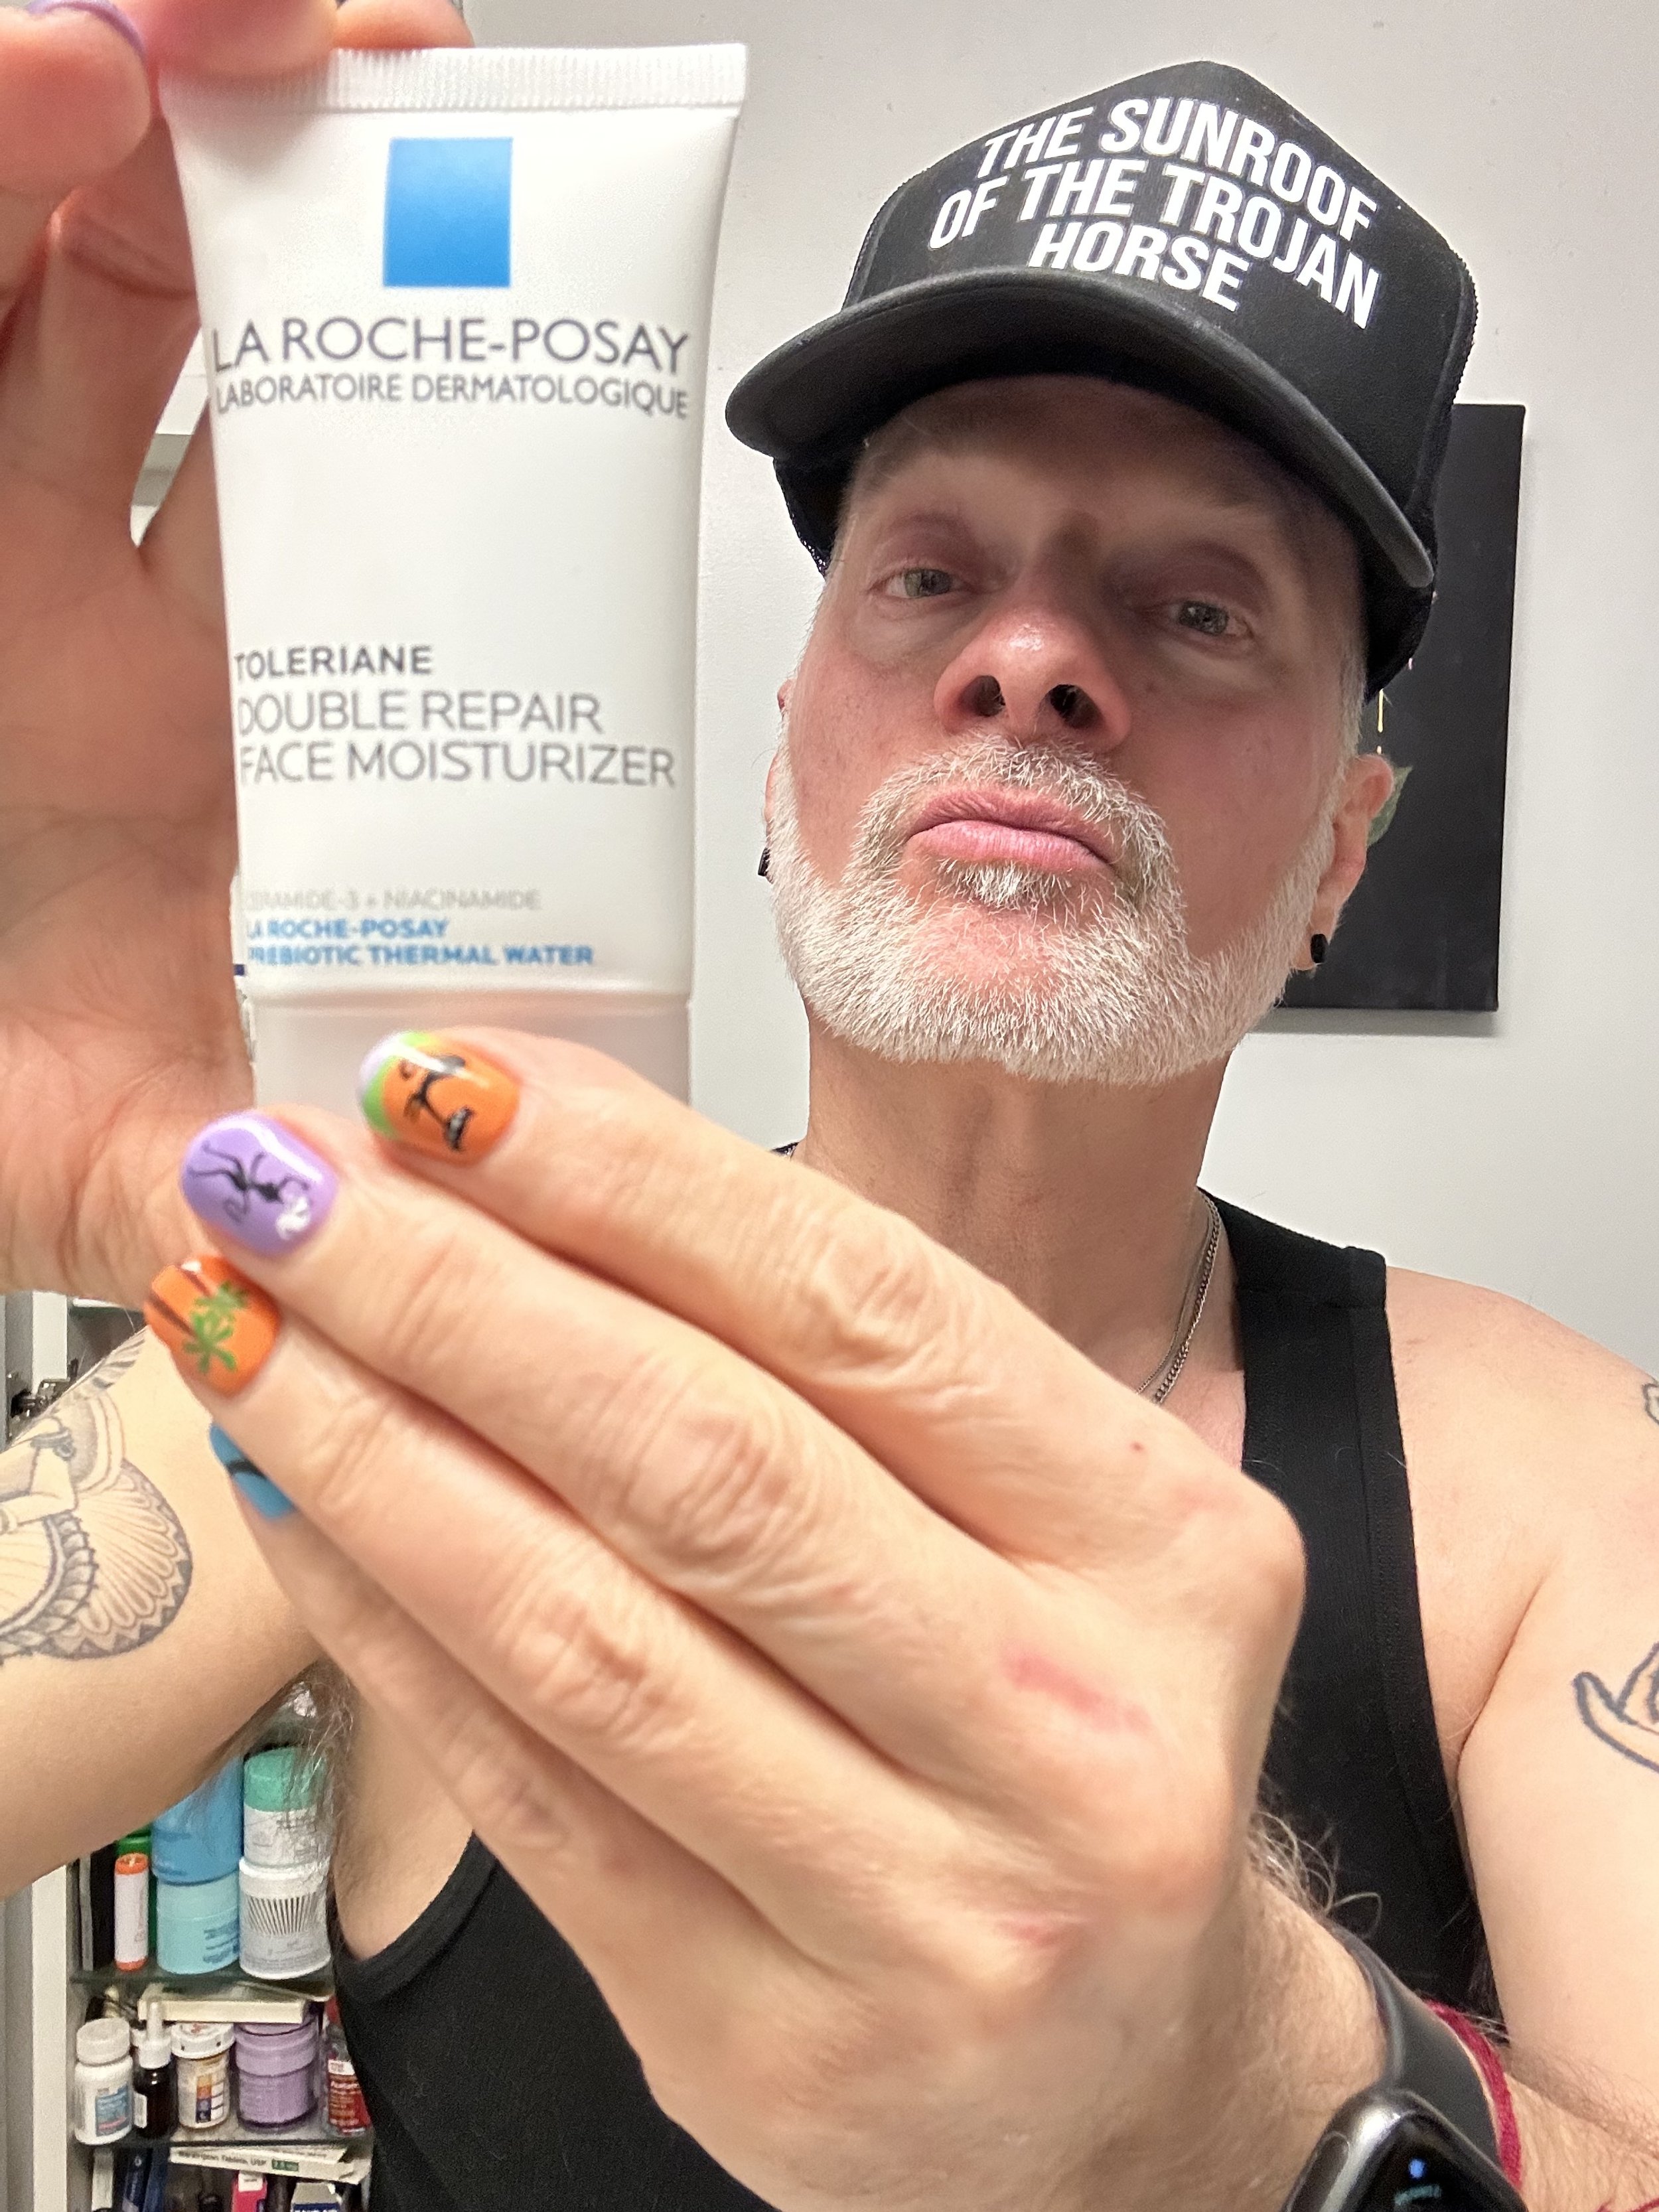 PRODUCT REVIEW ROCHE-POSAY TOLERIANE REPAIR FACE MOISTURIZER REVIEW - WHAT ARE PREBIOTICS